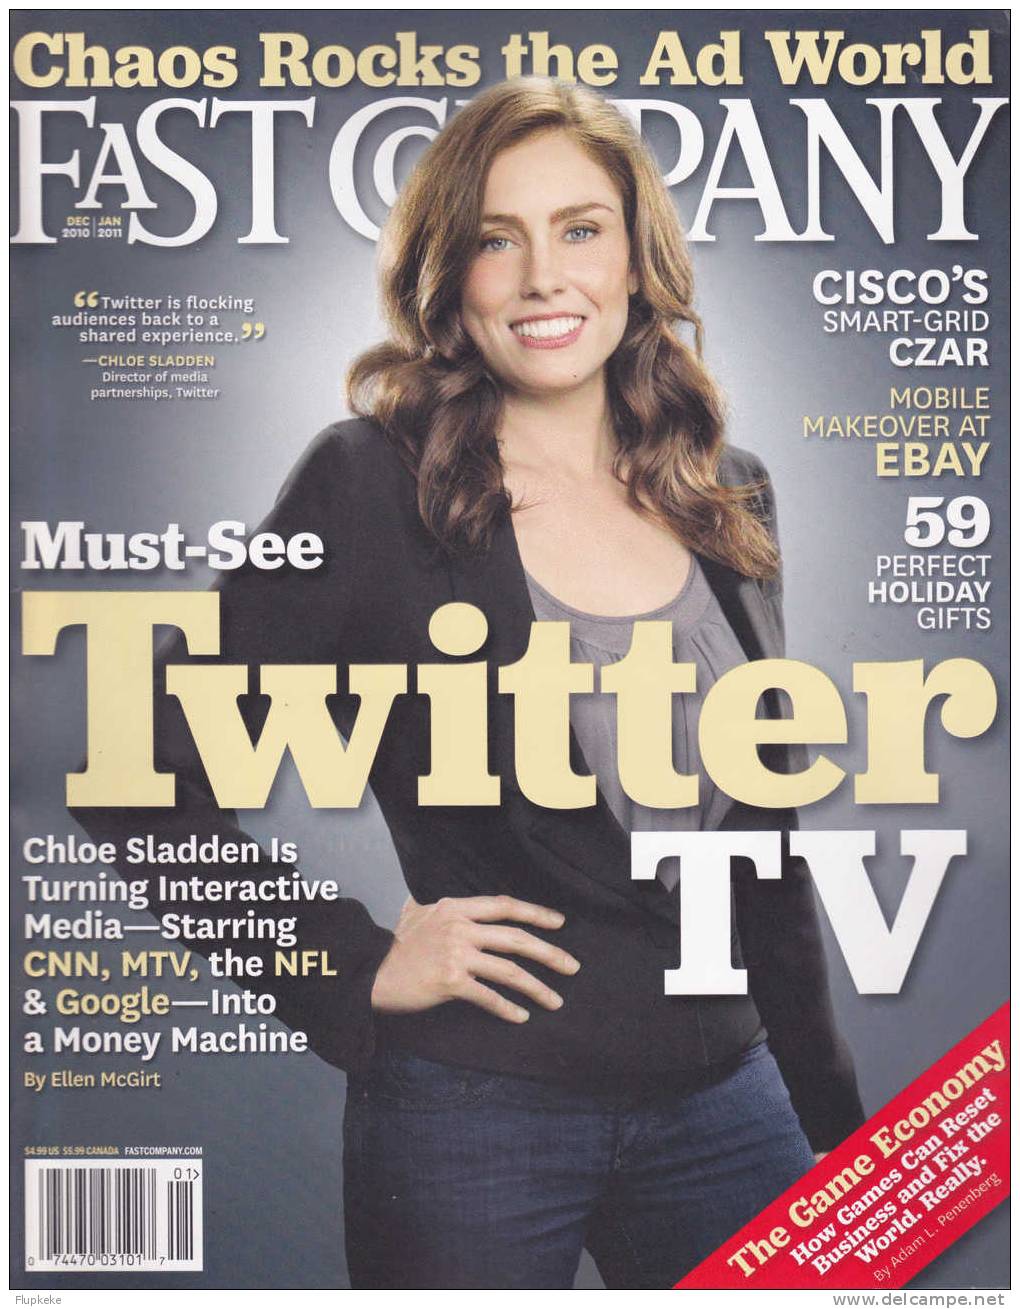 Fast Company 151 January 2011 Must-See Twitter Tv - Business/ Management